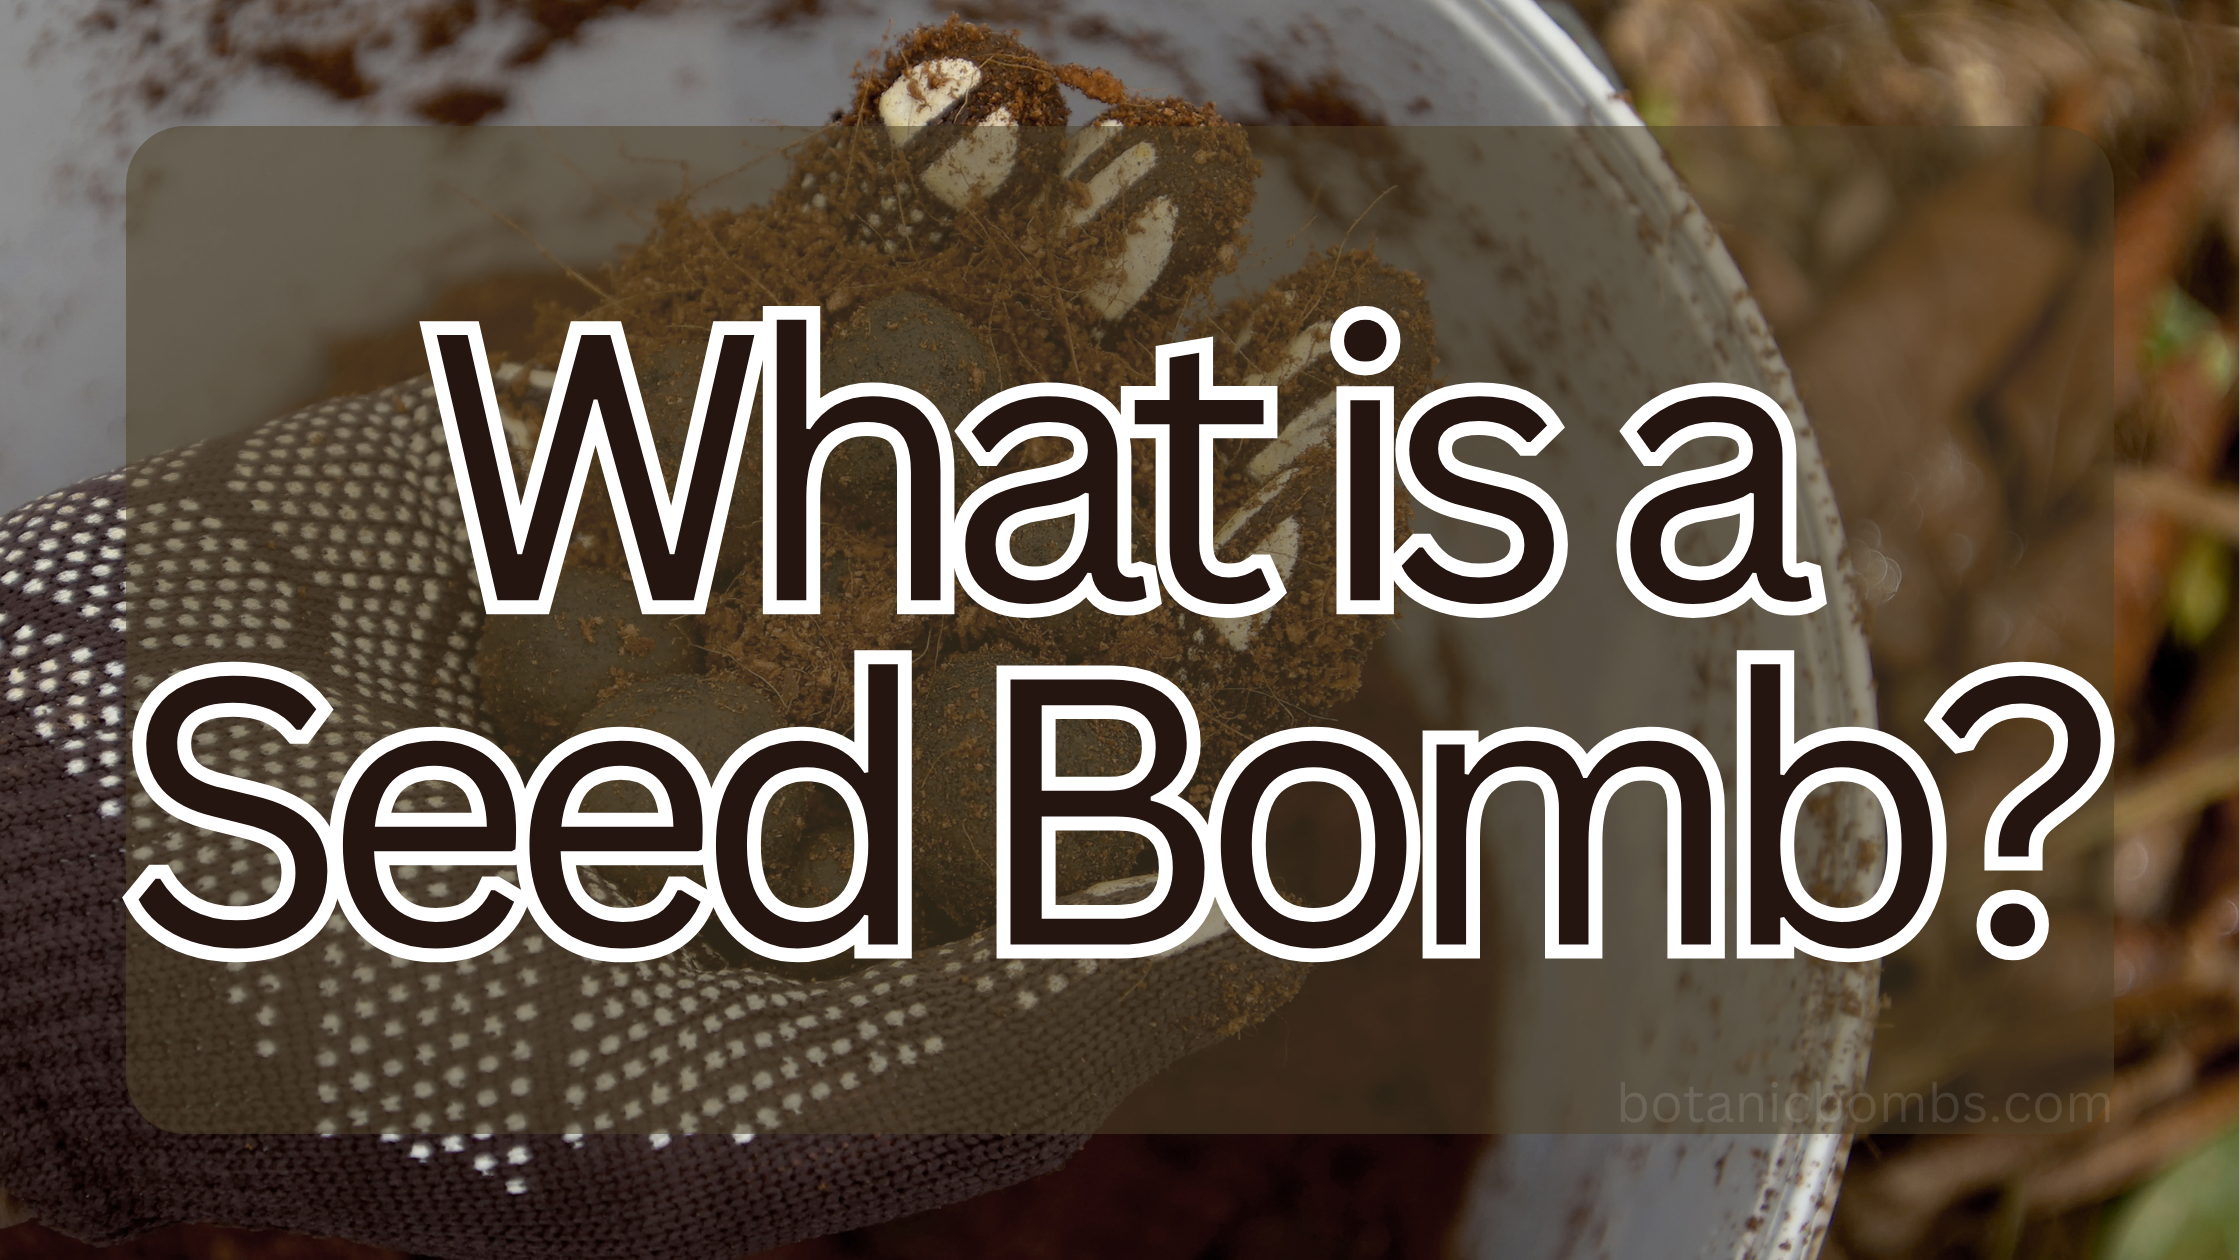 What is a Seed Bomb?